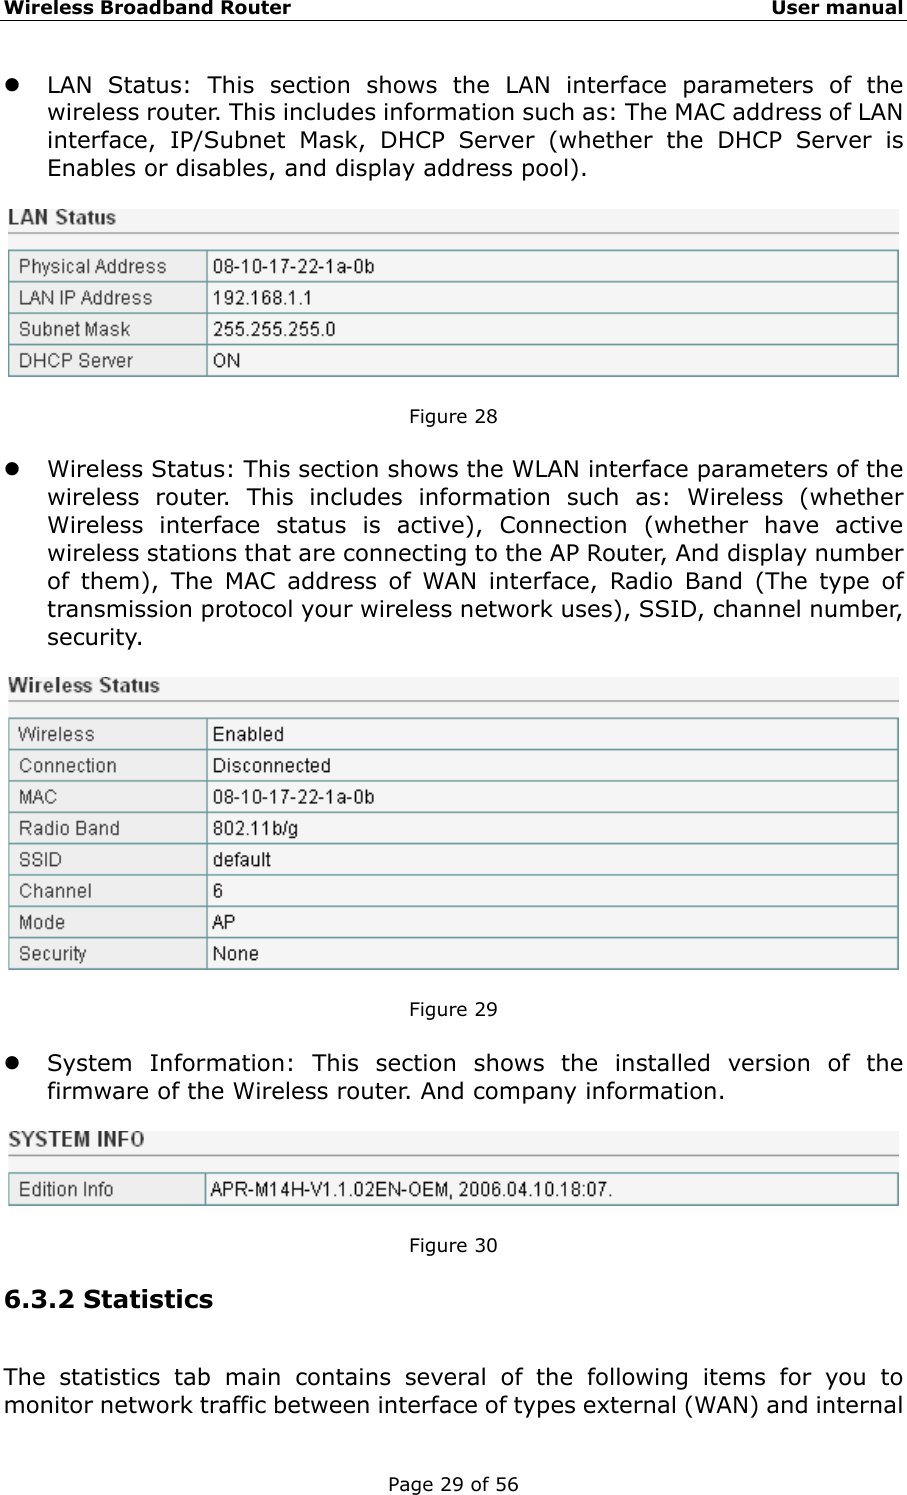 Wireless Broadband Router                                                   User manual Page 29 of 56 z LAN Status: This section shows the LAN interface parameters of the wireless router. This includes information such as: The MAC address of LAN interface, IP/Subnet Mask, DHCP Server (whether the DHCP Server is Enables or disables, and display address pool).    Figure 28  z Wireless Status: This section shows the WLAN interface parameters of the wireless router. This includes information such as: Wireless (whether Wireless interface status is active), Connection (whether have active wireless stations that are connecting to the AP Router, And display number of them), The MAC address of WAN interface, Radio Band (The type of transmission protocol your wireless network uses), SSID, channel number, security.    Figure 29  z System Information: This section shows the installed version of the firmware of the Wireless router. And company information.    Figure 30 6.3.2 Statistics The statistics tab main contains several of the following items for you to monitor network traffic between interface of types external (WAN) and internal 